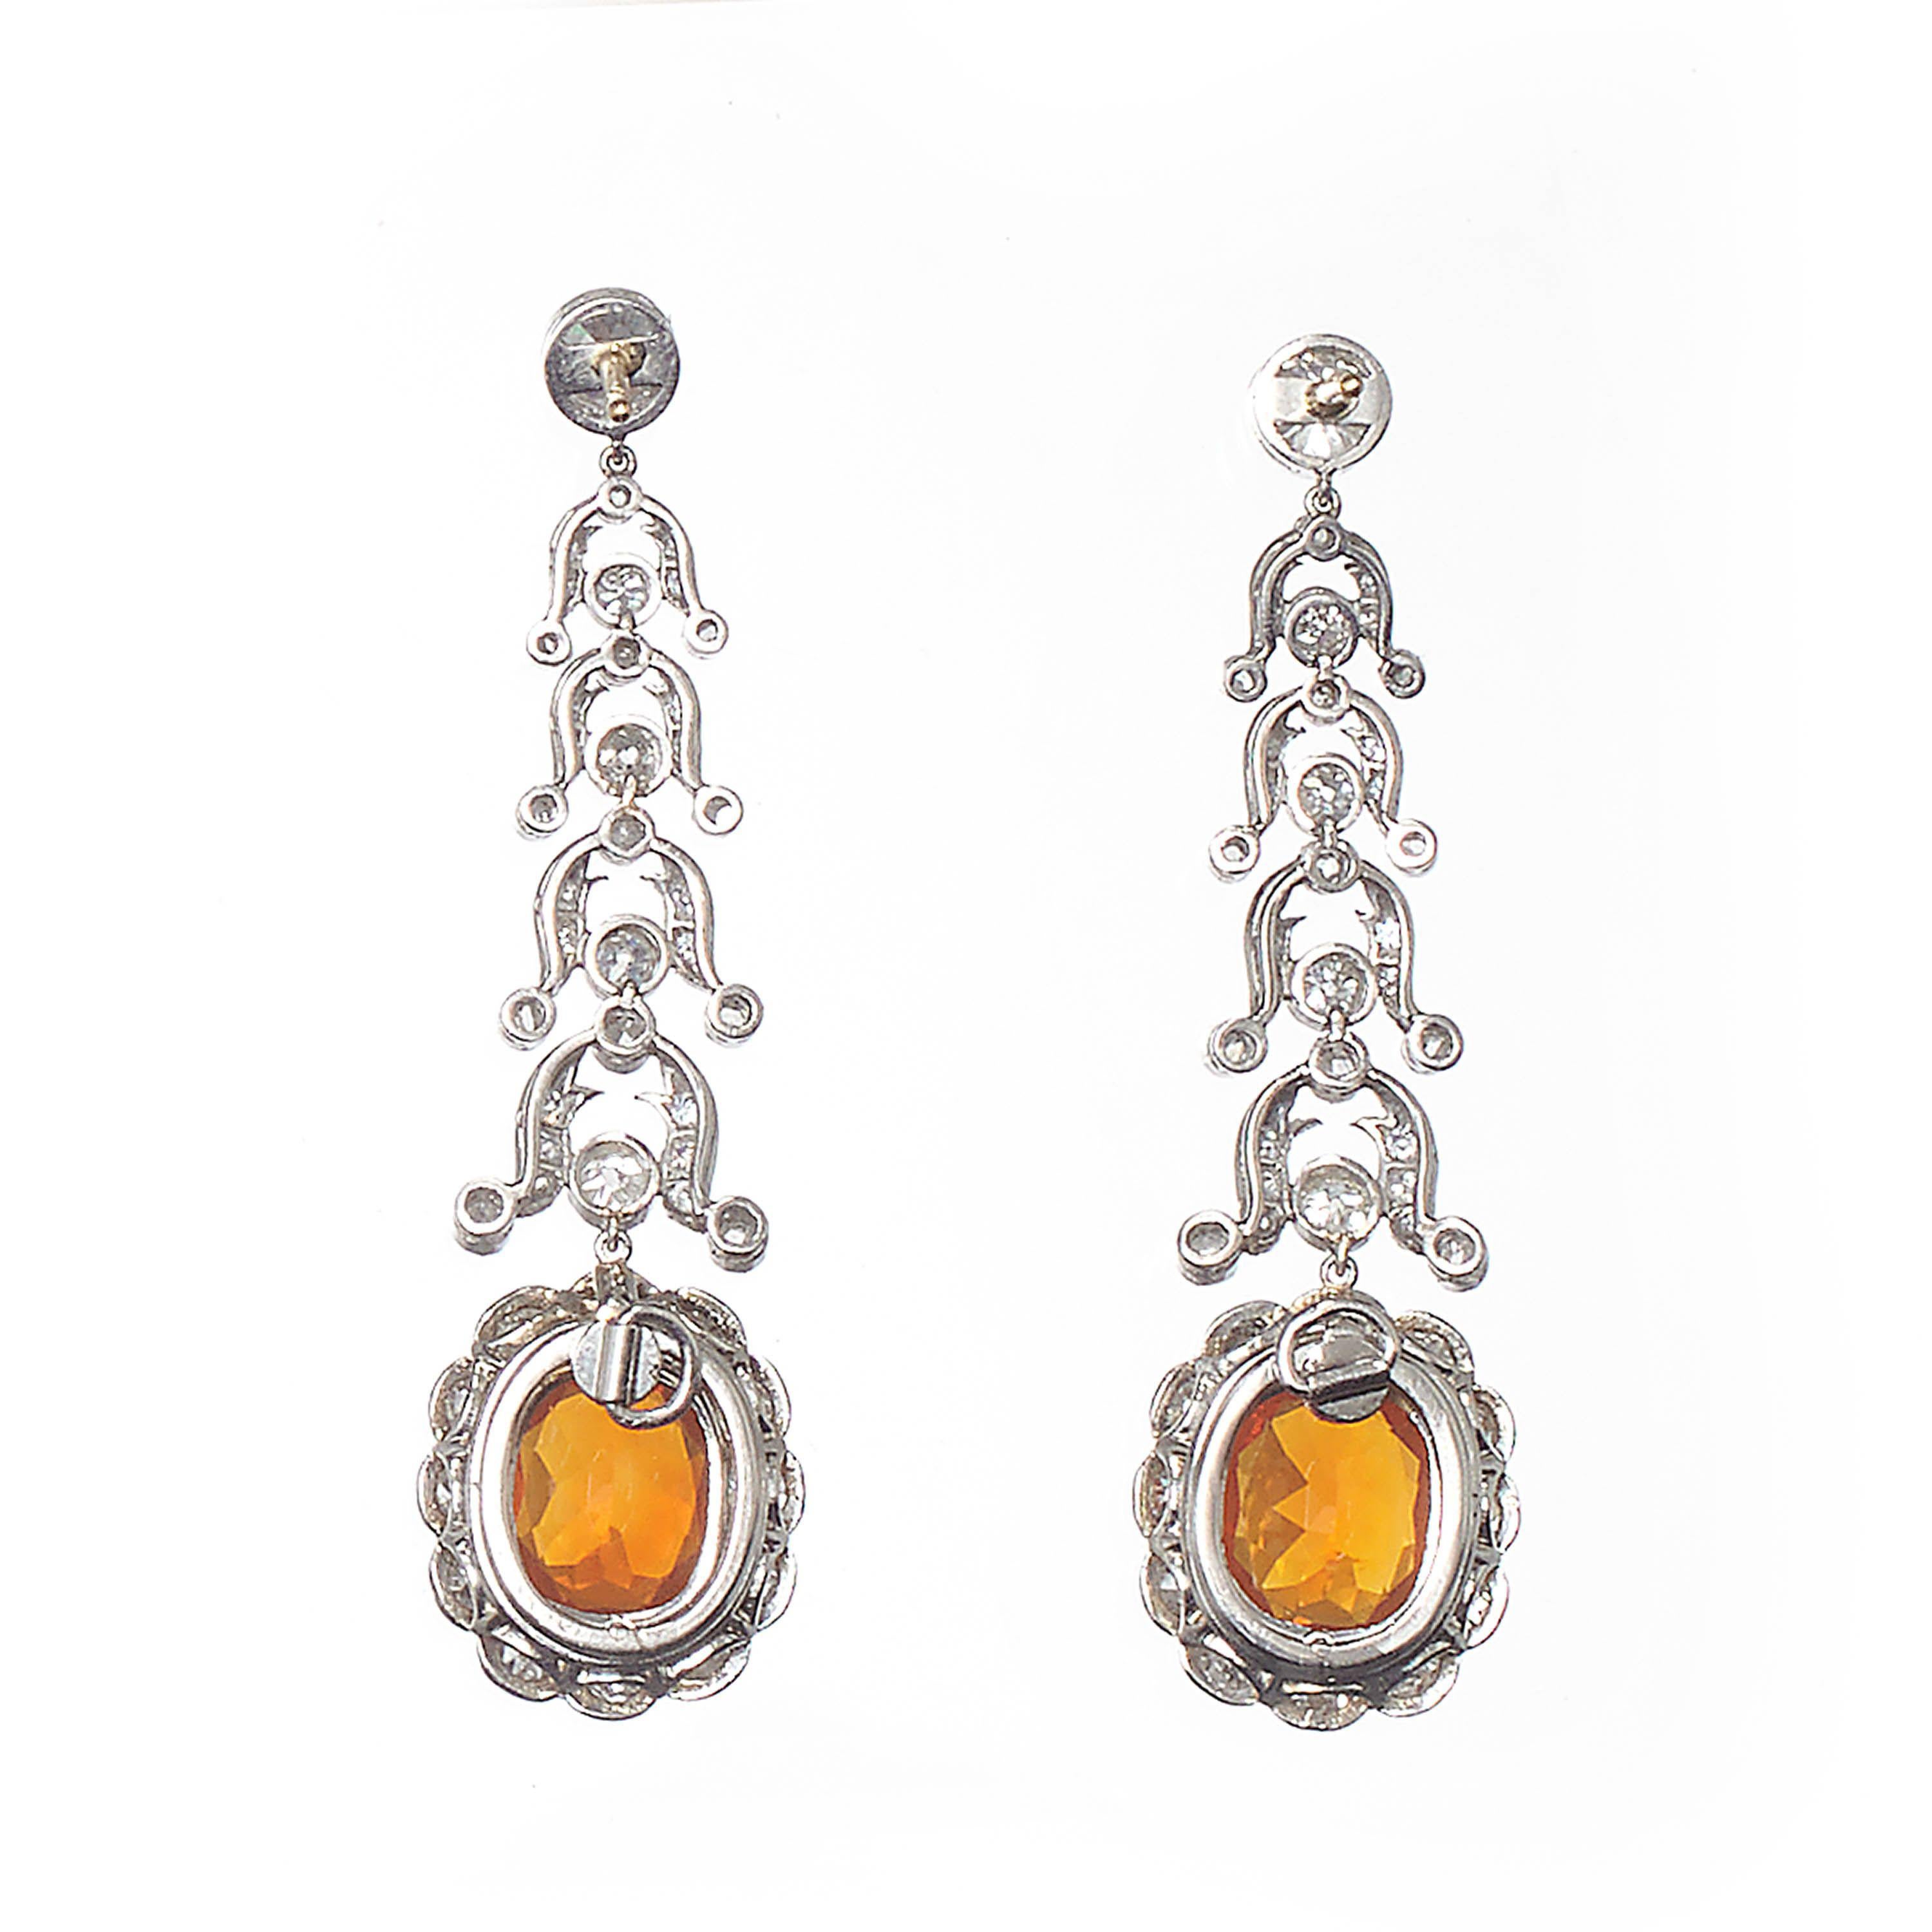 Garrards Fire Opal Diamond and Platinum Drop Earrings and Negligee Pendant Set For Sale 1